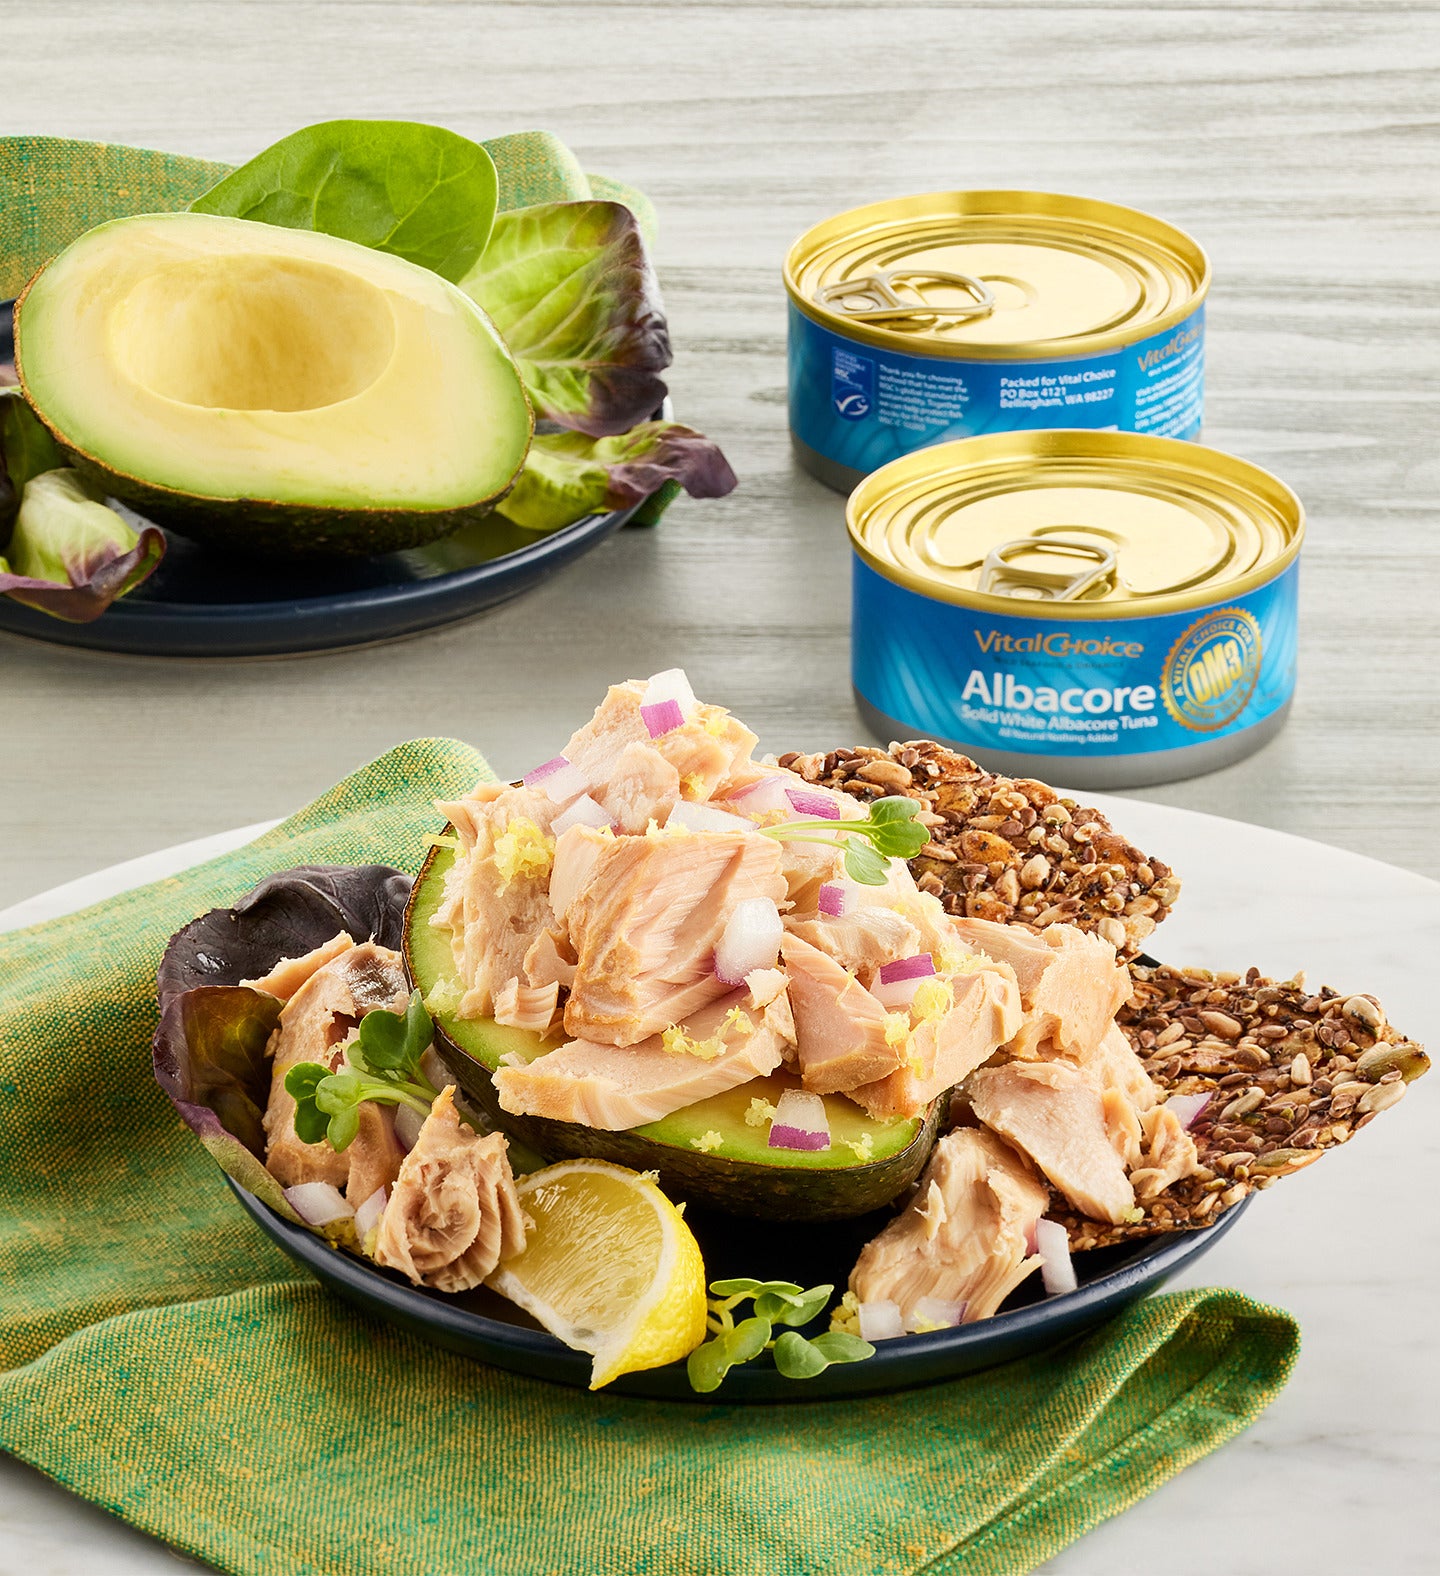 Canned Albacore Tuna - nothing added